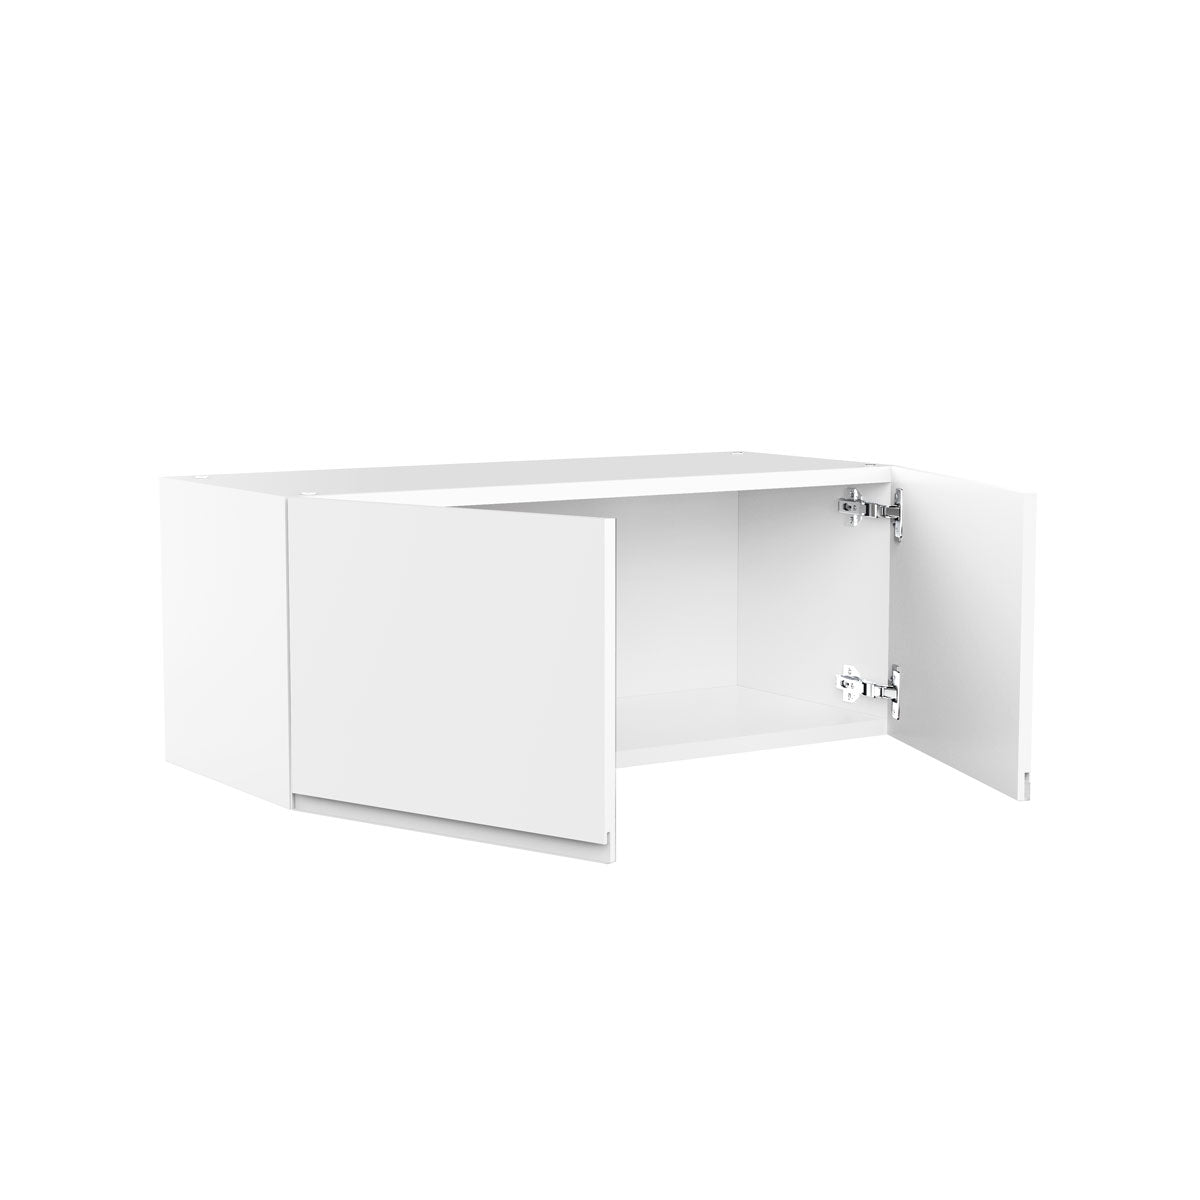 Kitchen Wall Cabinet - RTA - Lacquer white - 2 Door Wall Cabinet | 30"W x 12"H x 12"D